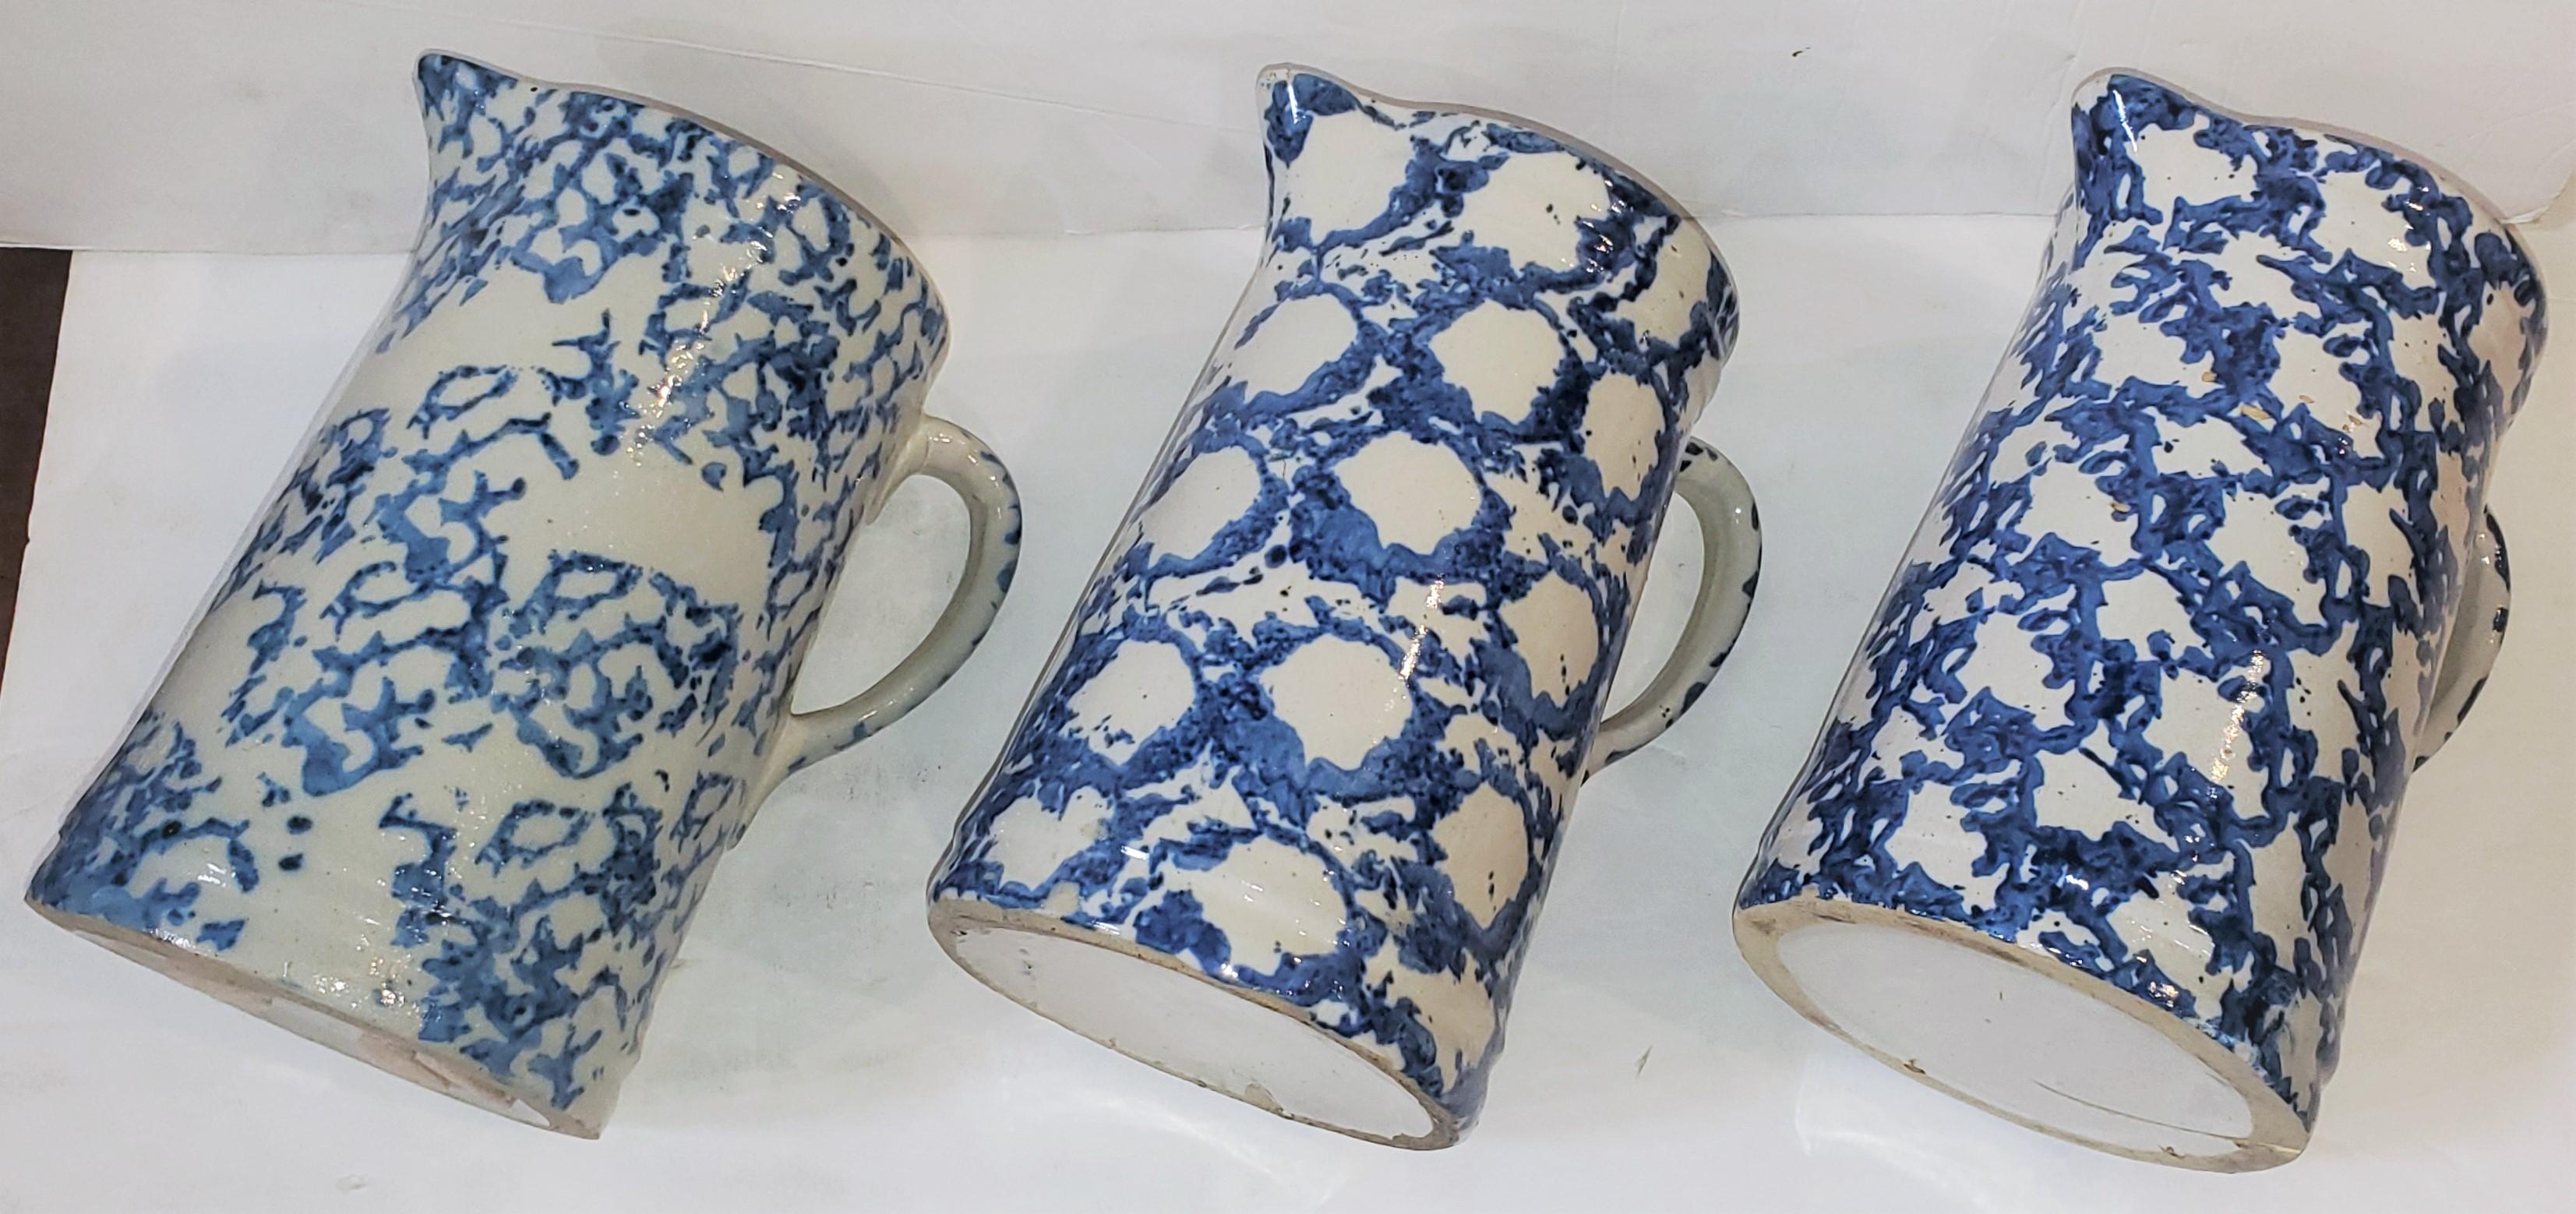 Set of three 19thc sponge ware pitchers in unusual smoke patterns. 2 smoke ring pattern pitchers. All pitchers are in pristine condition. Sold as a collection of three.